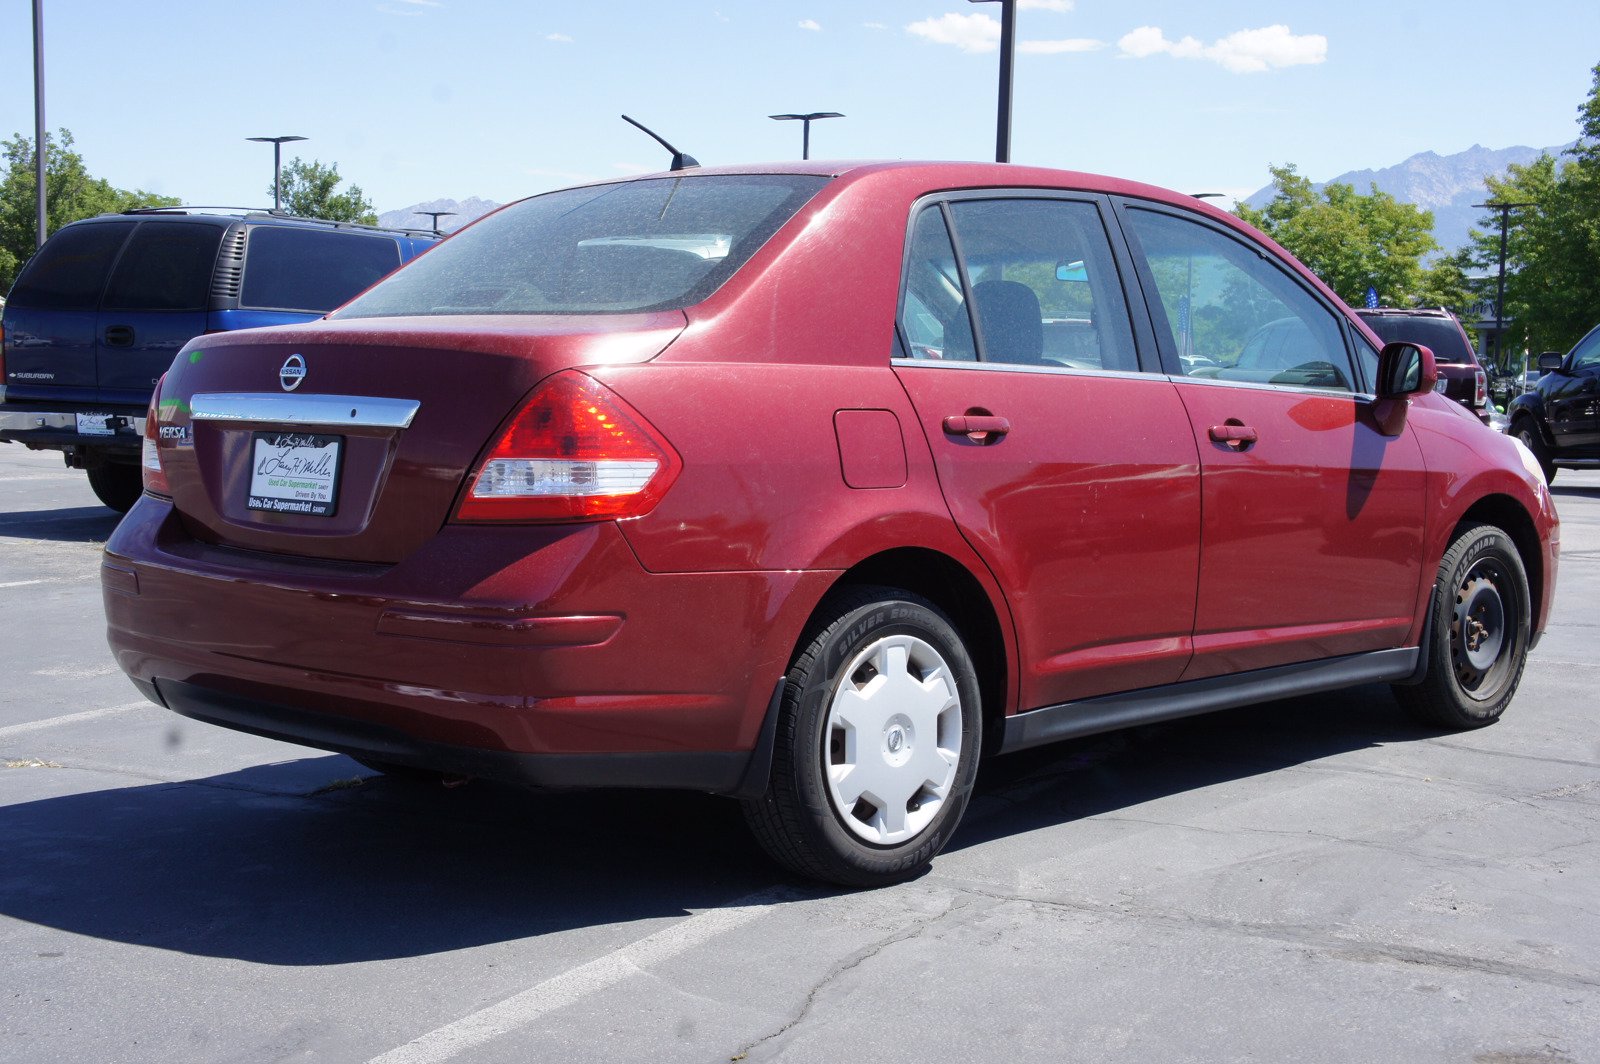 PreOwned 2009 Nissan Versa 1.8 S 4dr Car in Sandy S8353D